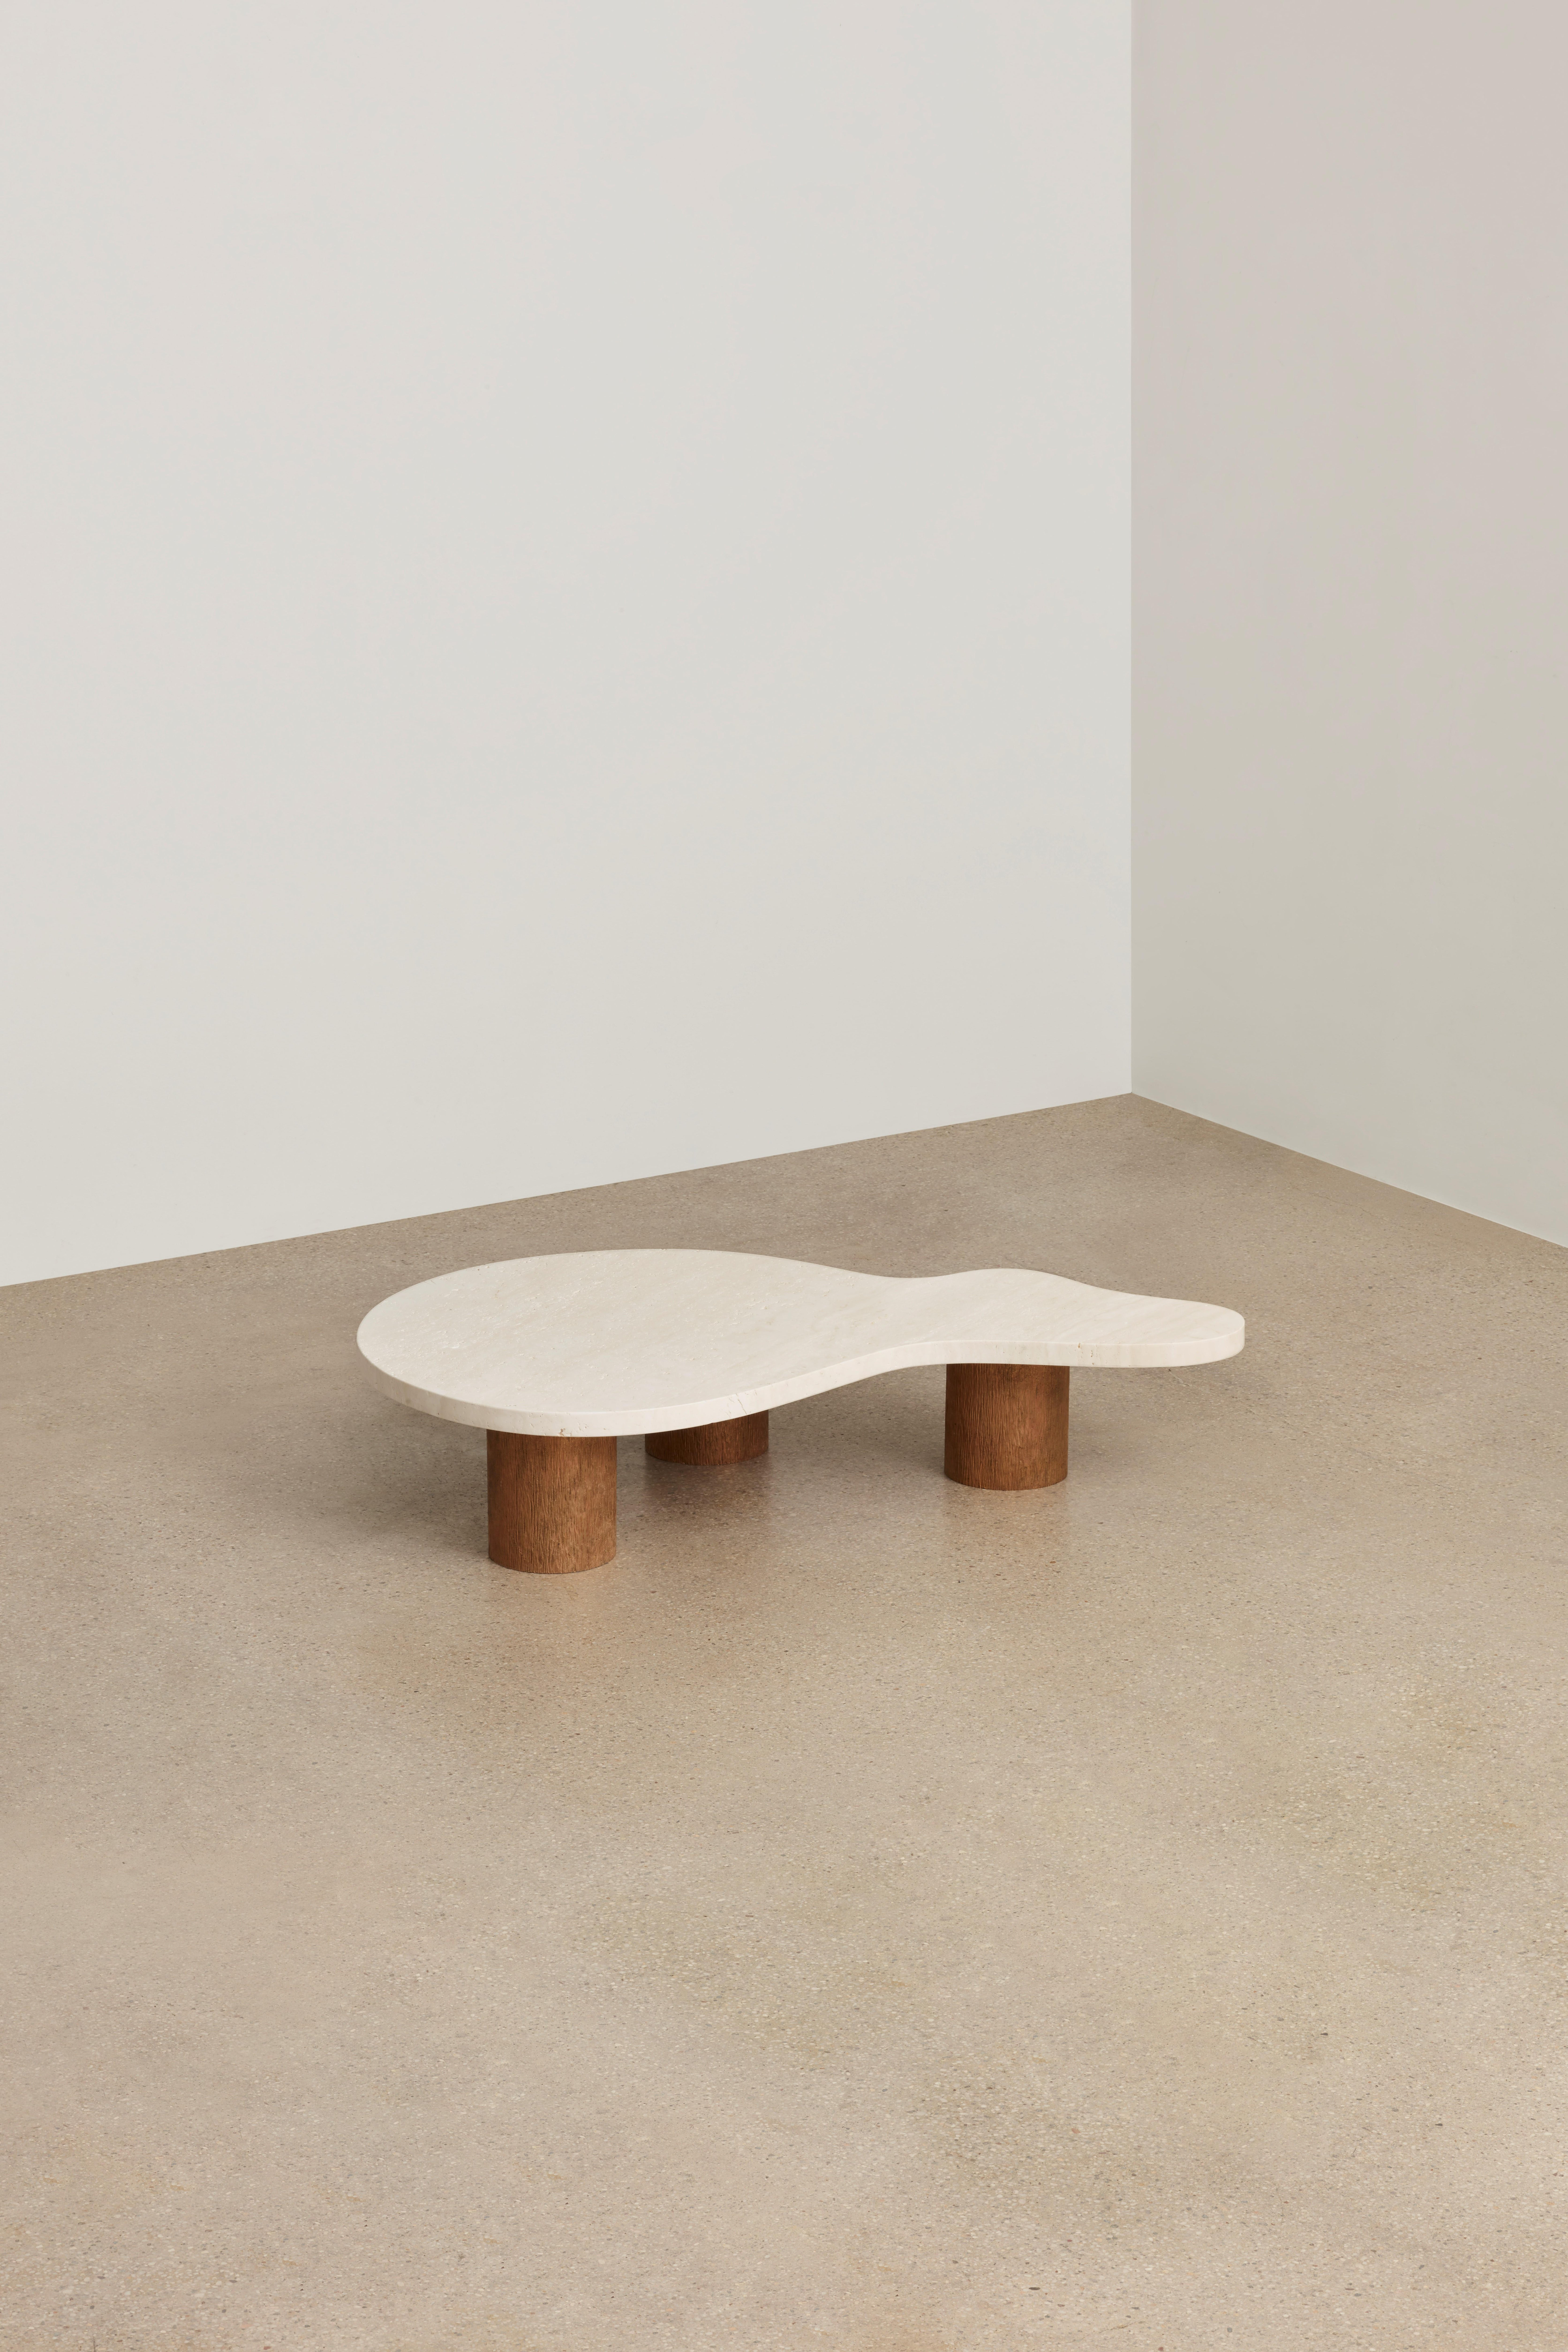 Luca coffee table small by Umberto Bellardi Ricci
Dimensions: W71.1 x D109.24 x H22.9 cm
Materials: Travertine, bronze legs.

Umberto Bellardi Ricci is an Italian sculptor and architect based in New York City, practicing across London, Mexico,